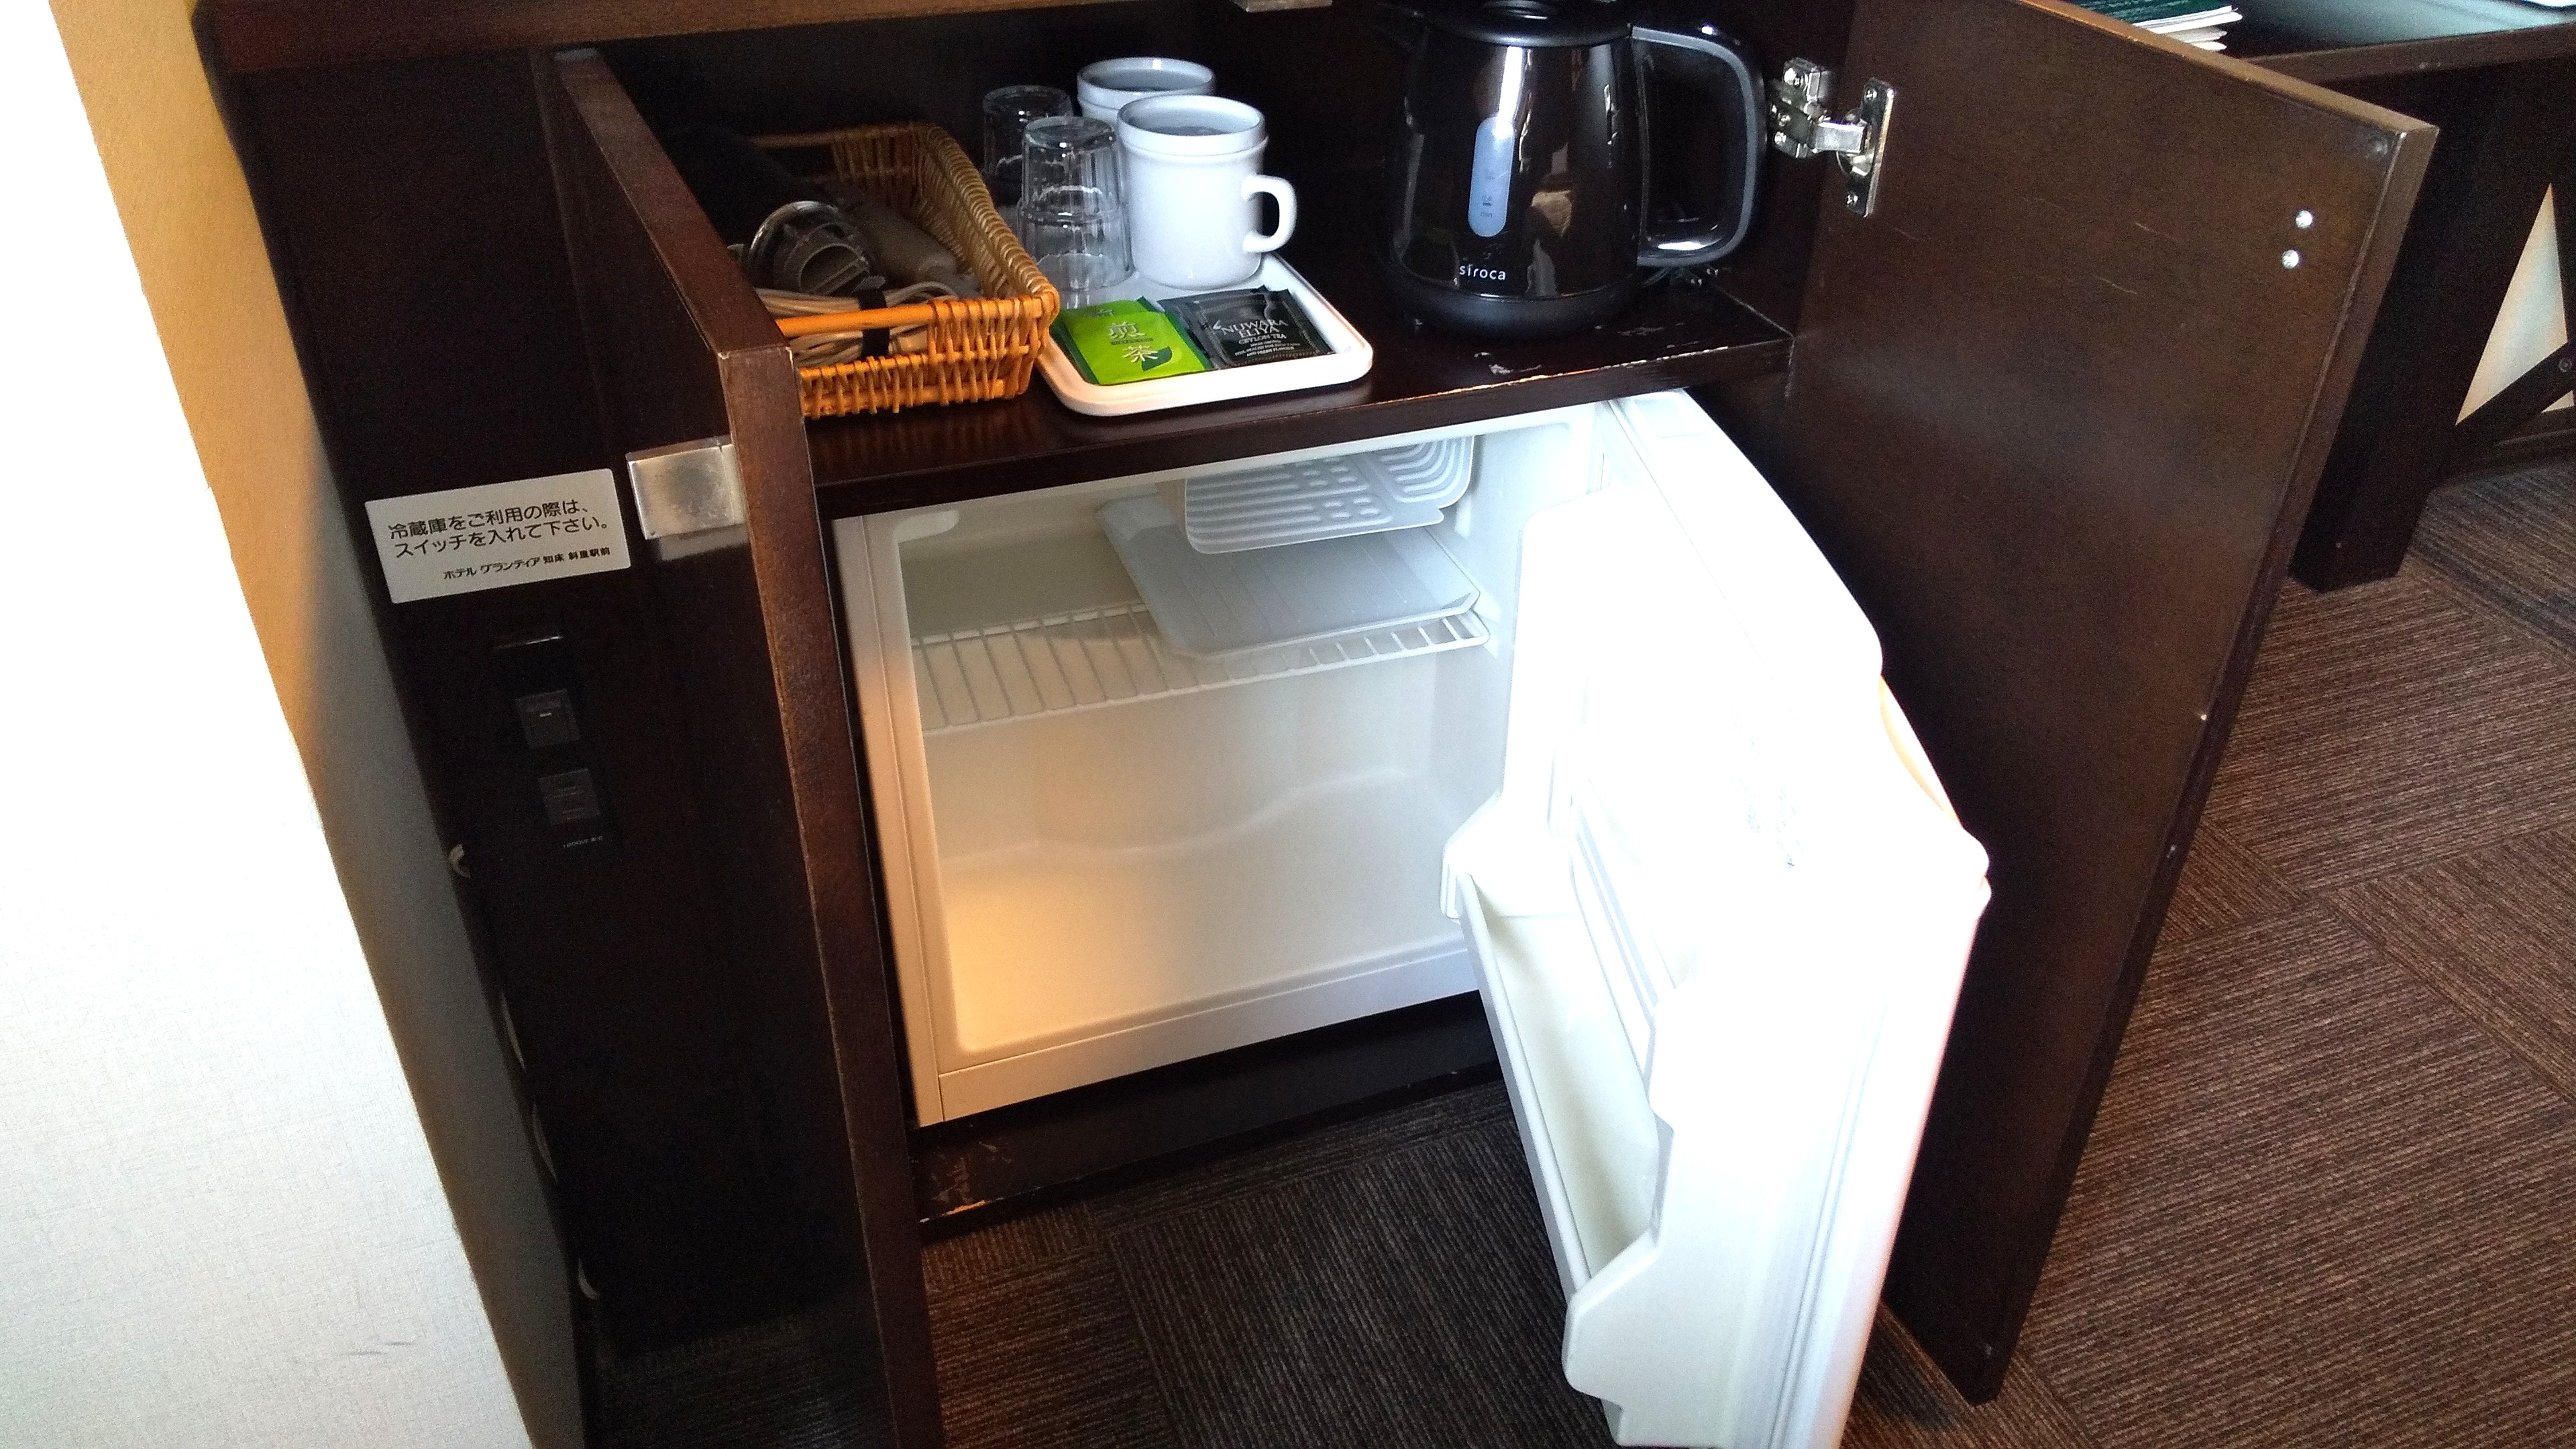 A mini fridge, hairdryer and electric kettle are also provided in the guest rooms.